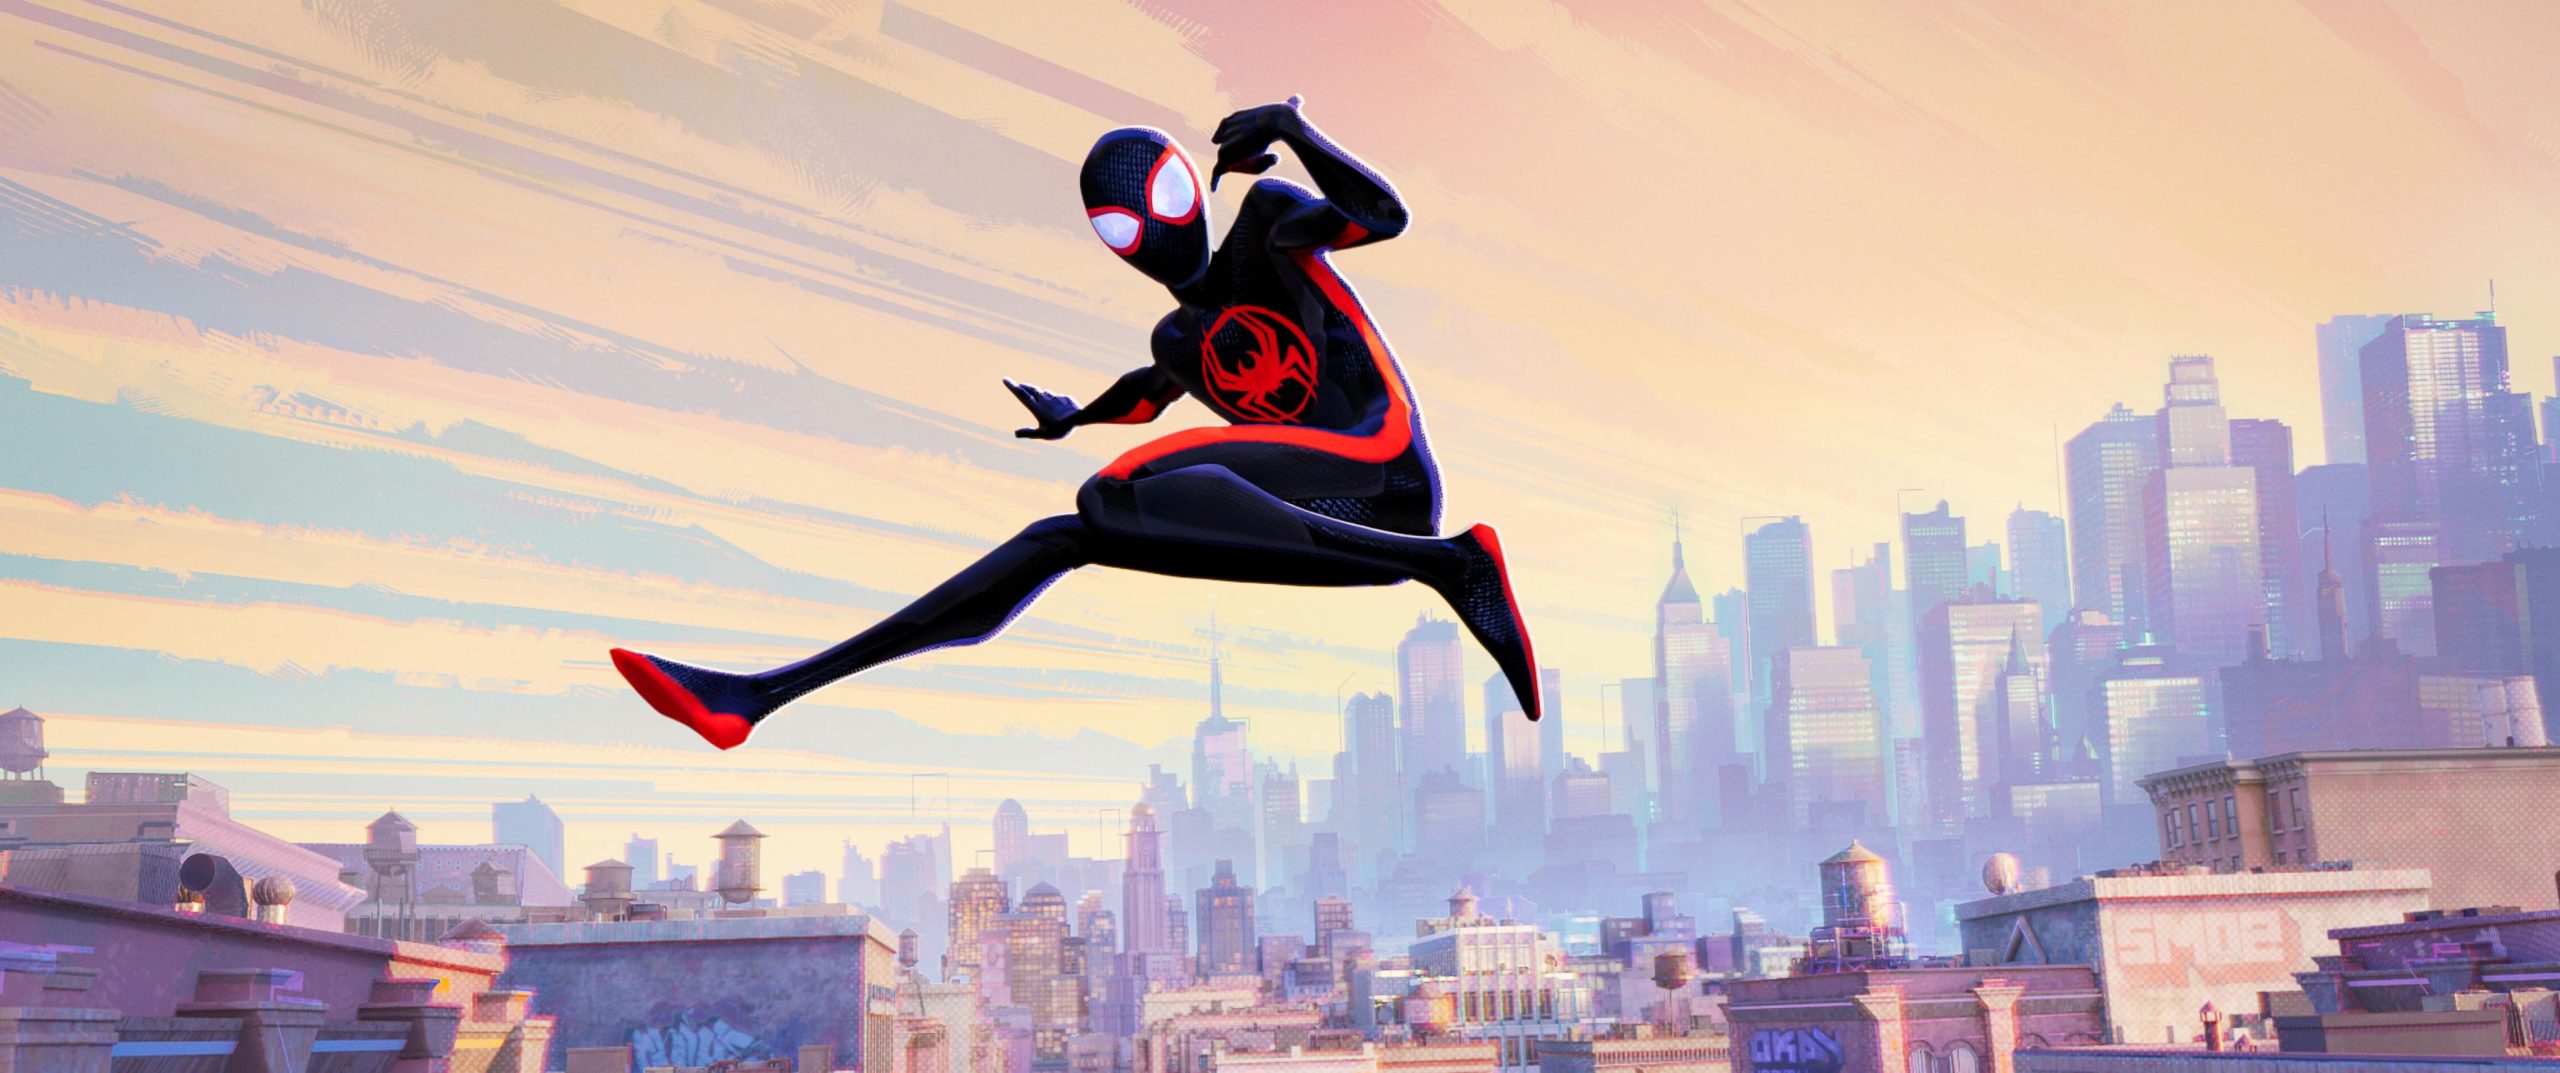 Miles Morales Spider-Man Across The Spider-Verse 1080p Wallpaper, Miles Morales Spider-Man Across The Spider-Verse, Movies